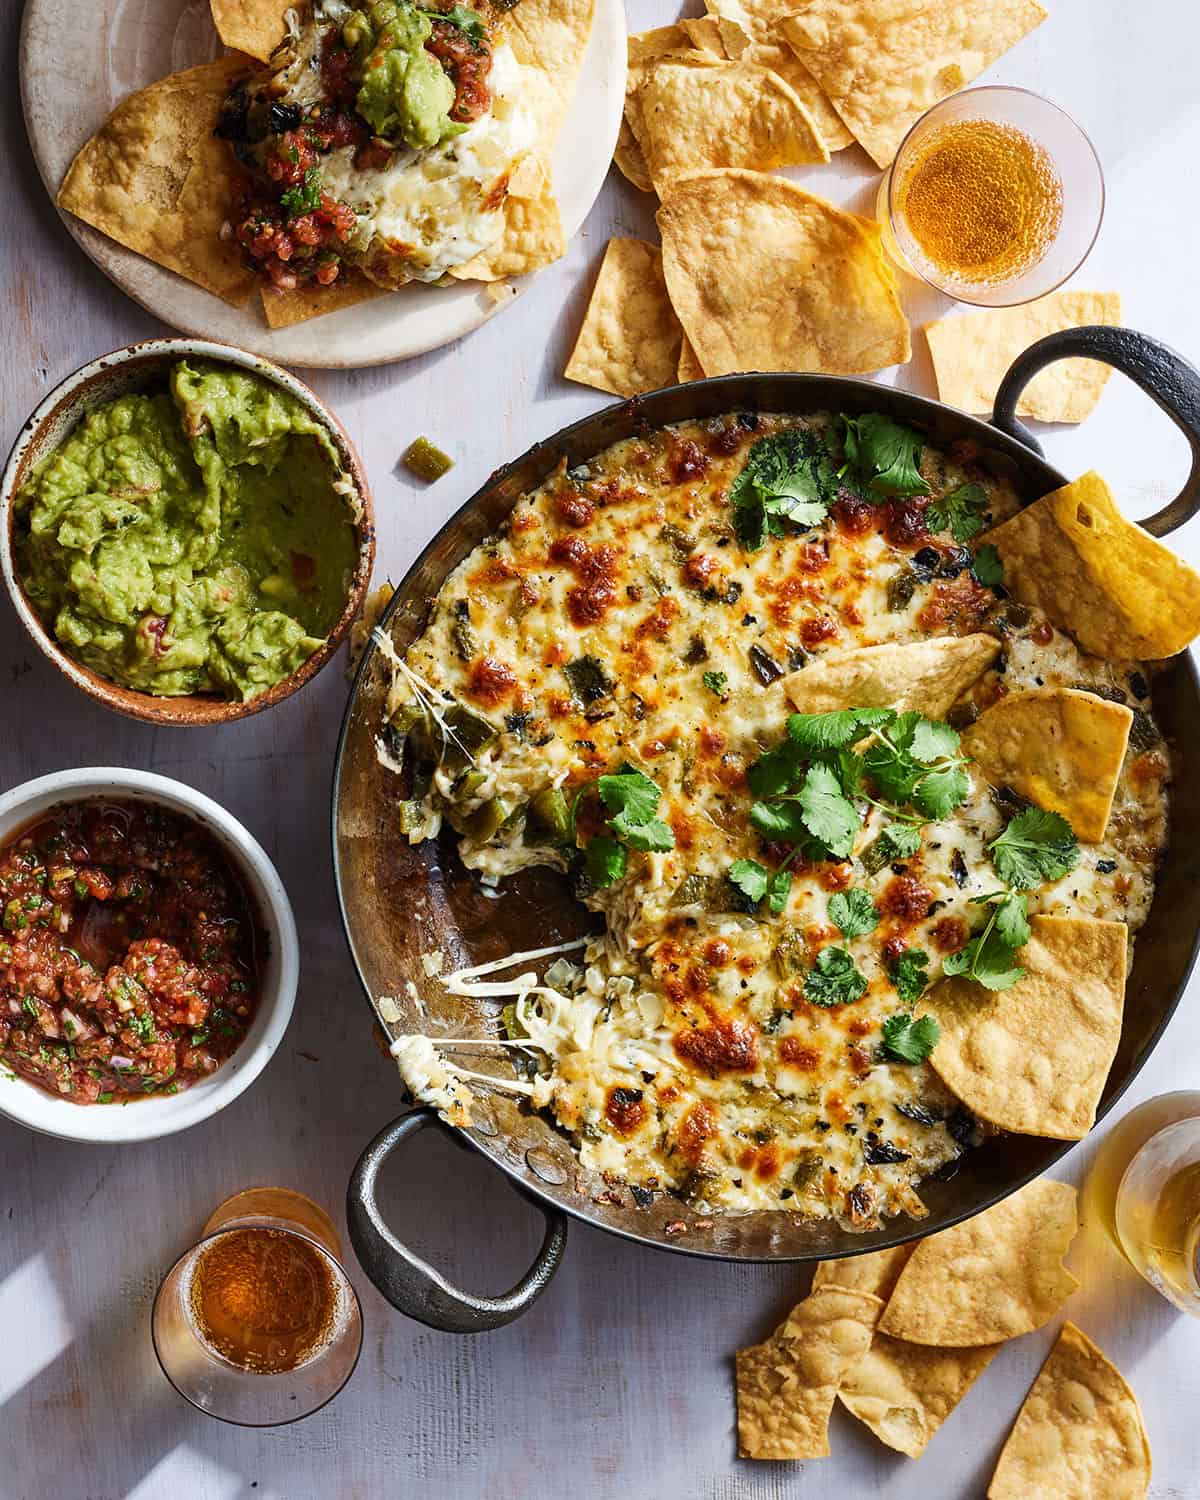 A tabletop with a skillet of queso next to bowls of guacamole, salsa, a beer, and a plate full of nachos.  